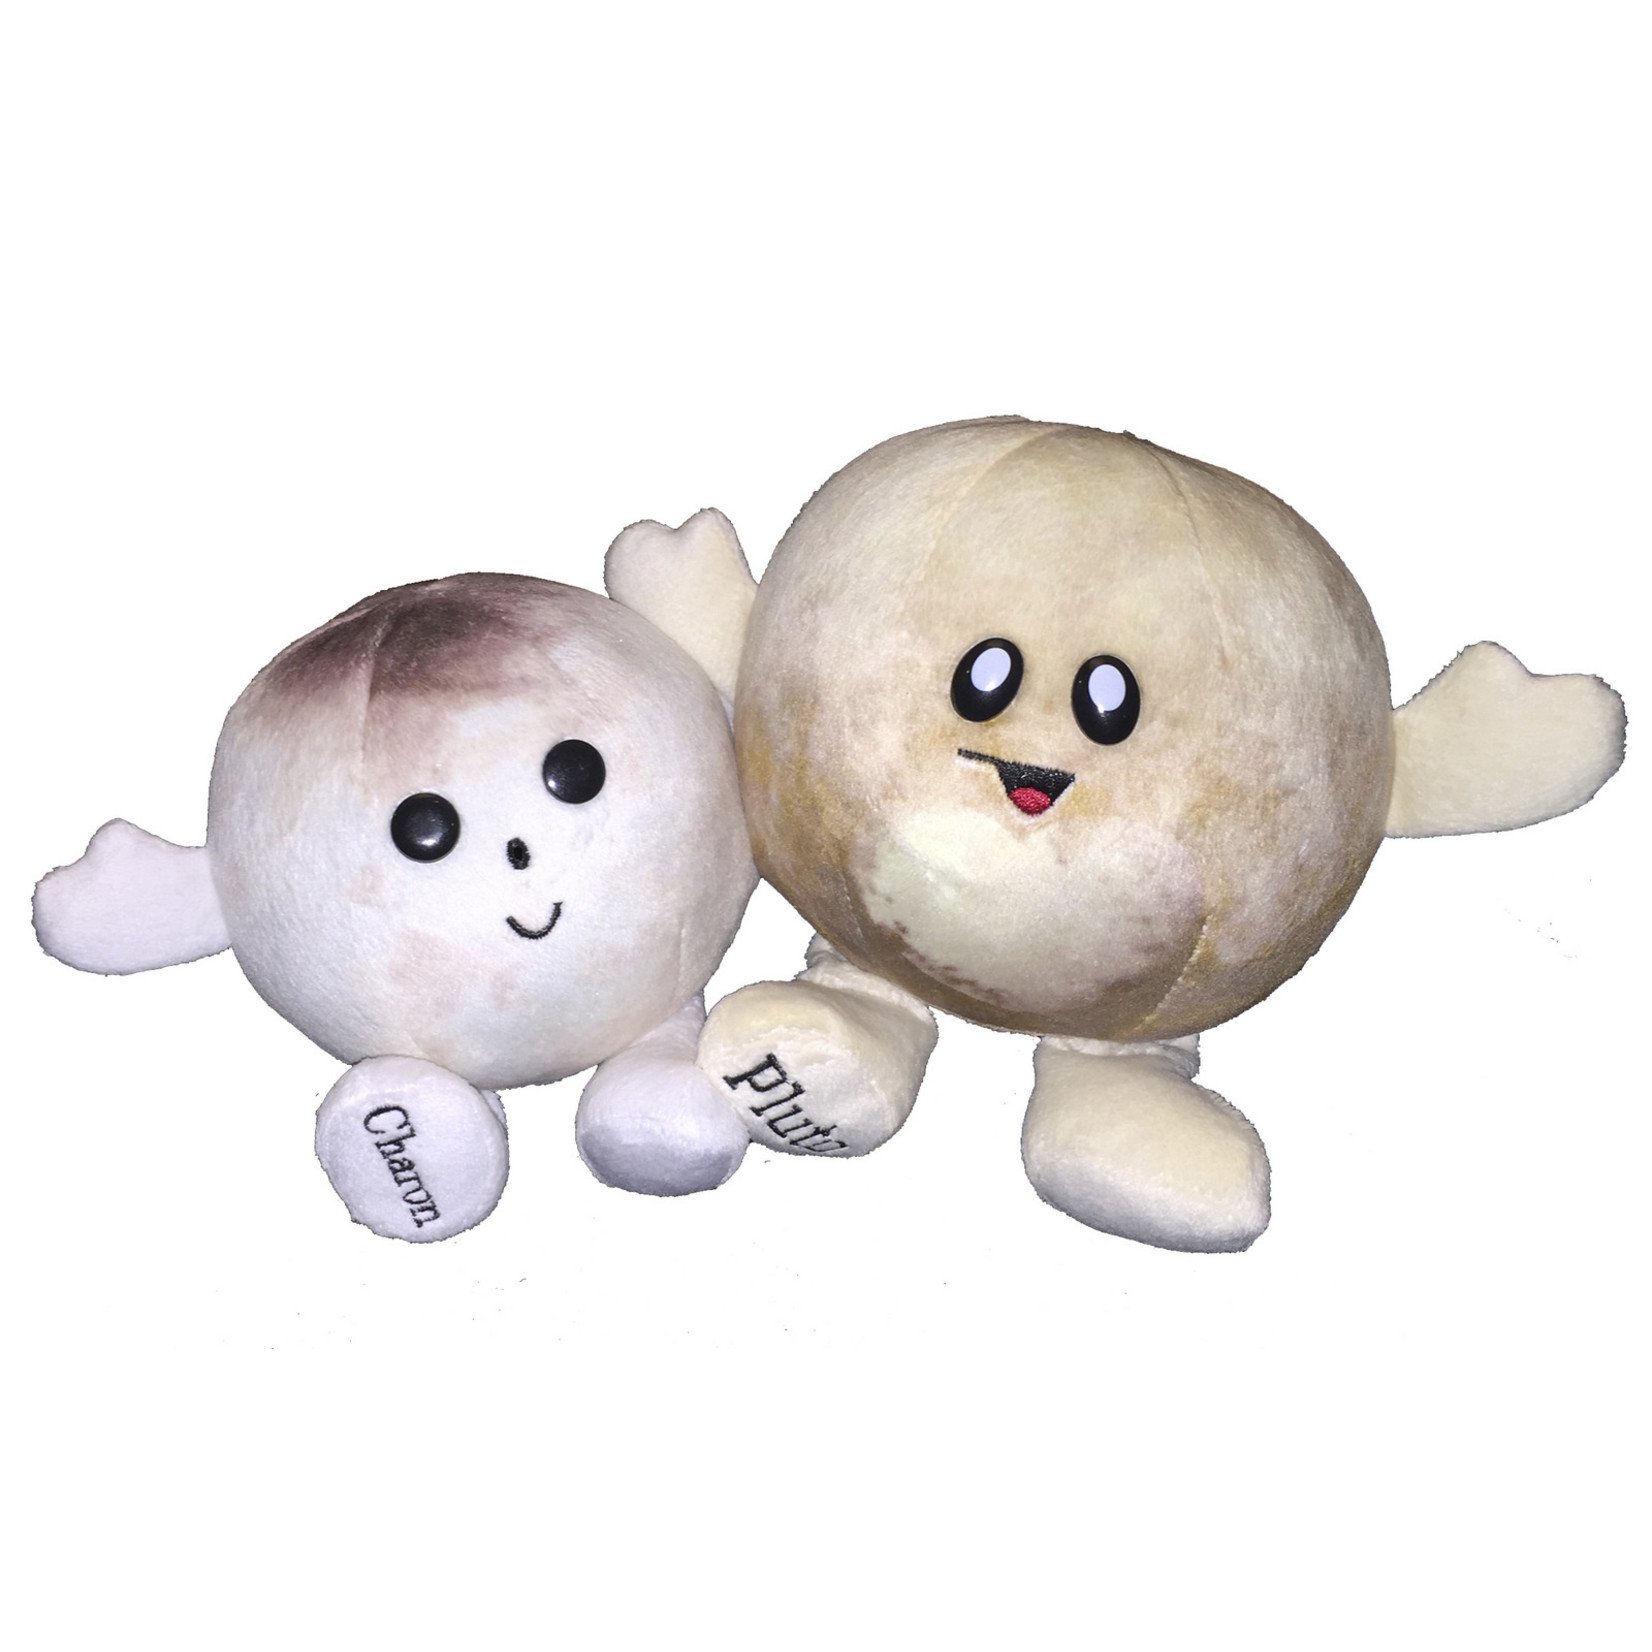 Aviation and Space Celestial Buddies™  Pluton et Charon pelucheuses